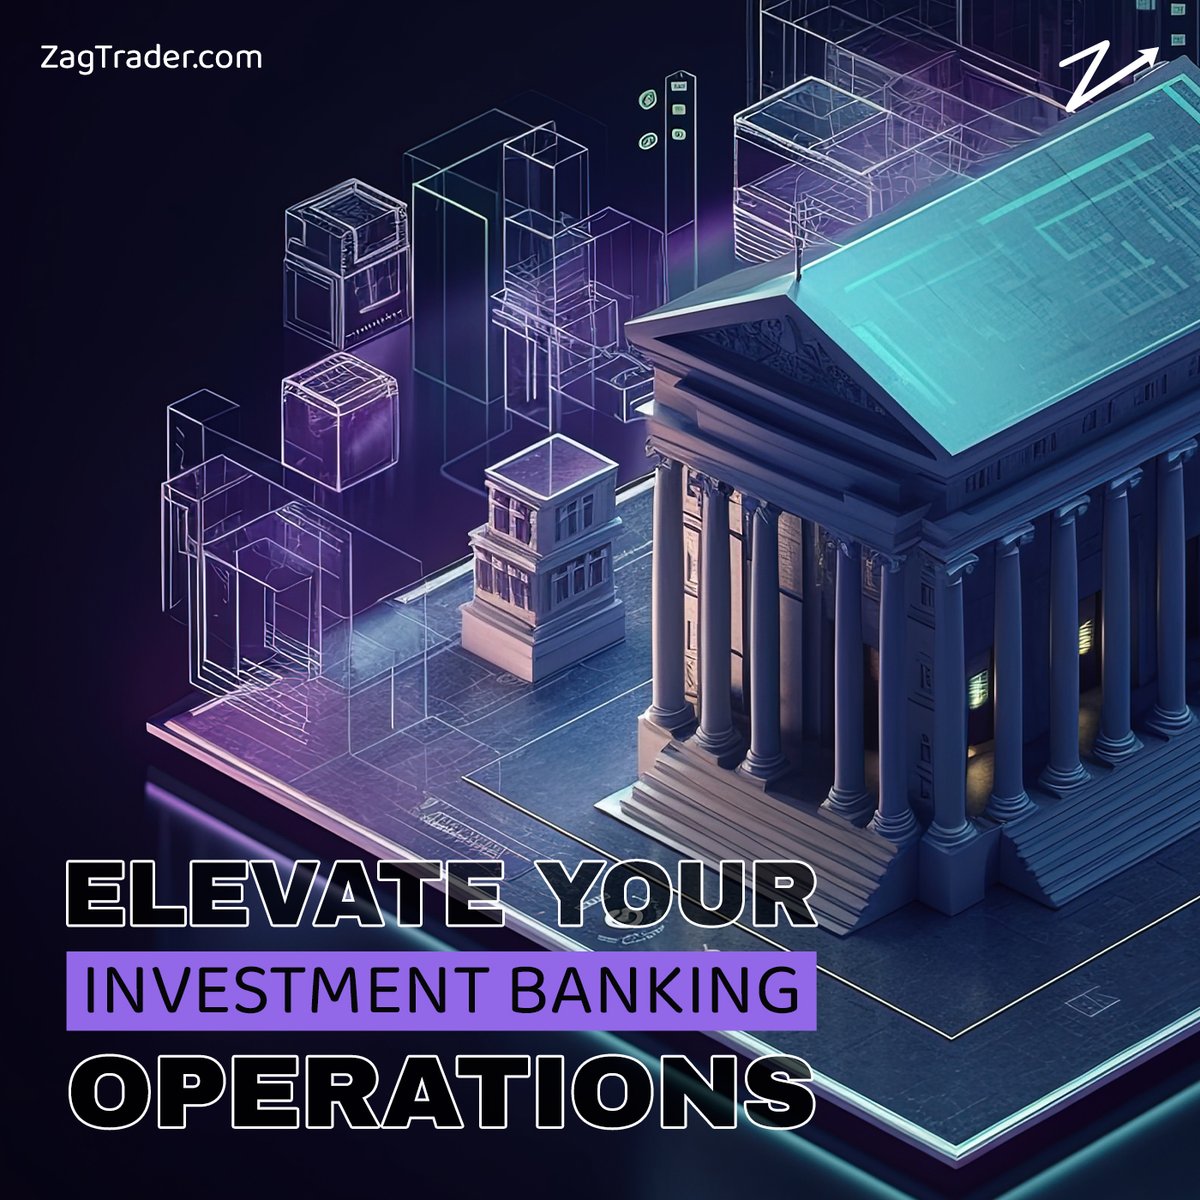 Take your investment banking to the next level with ZagTrader's advanced suite. Streamline operations, optimize efficiency, and outperform the competition. Ready to elevate? Connect with ZagTrader. #InvestmentBanking #ZagTrader #FinancialInnovation #MarketSolutions…